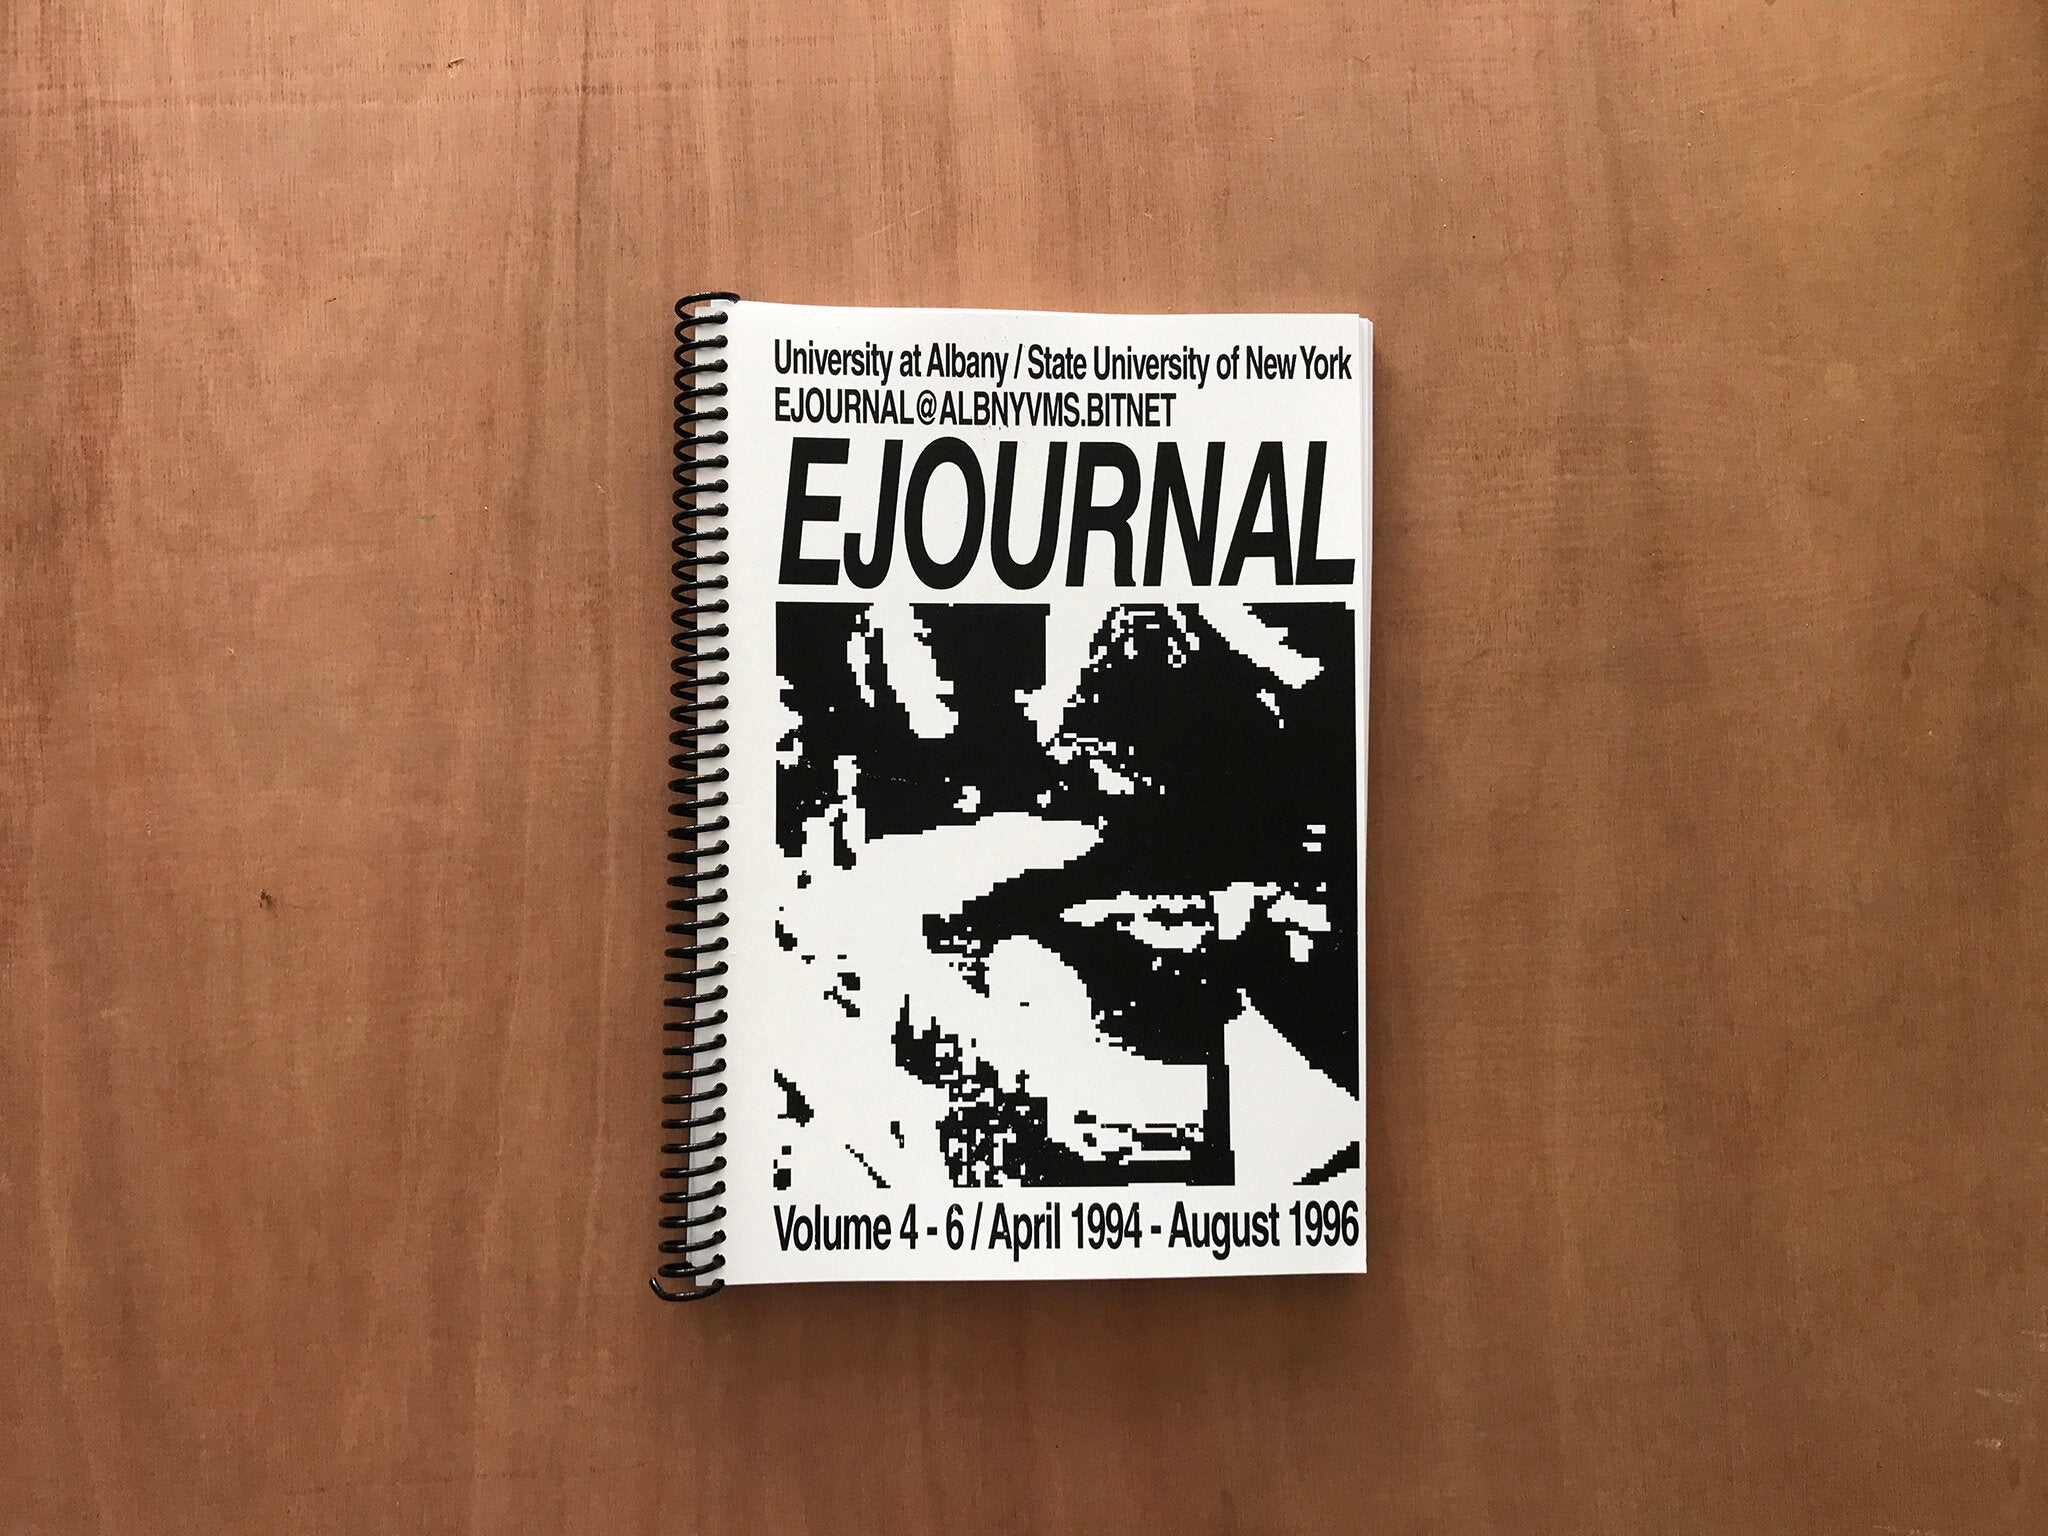 EJOURNAL VOLUME 4-6 by Robin N